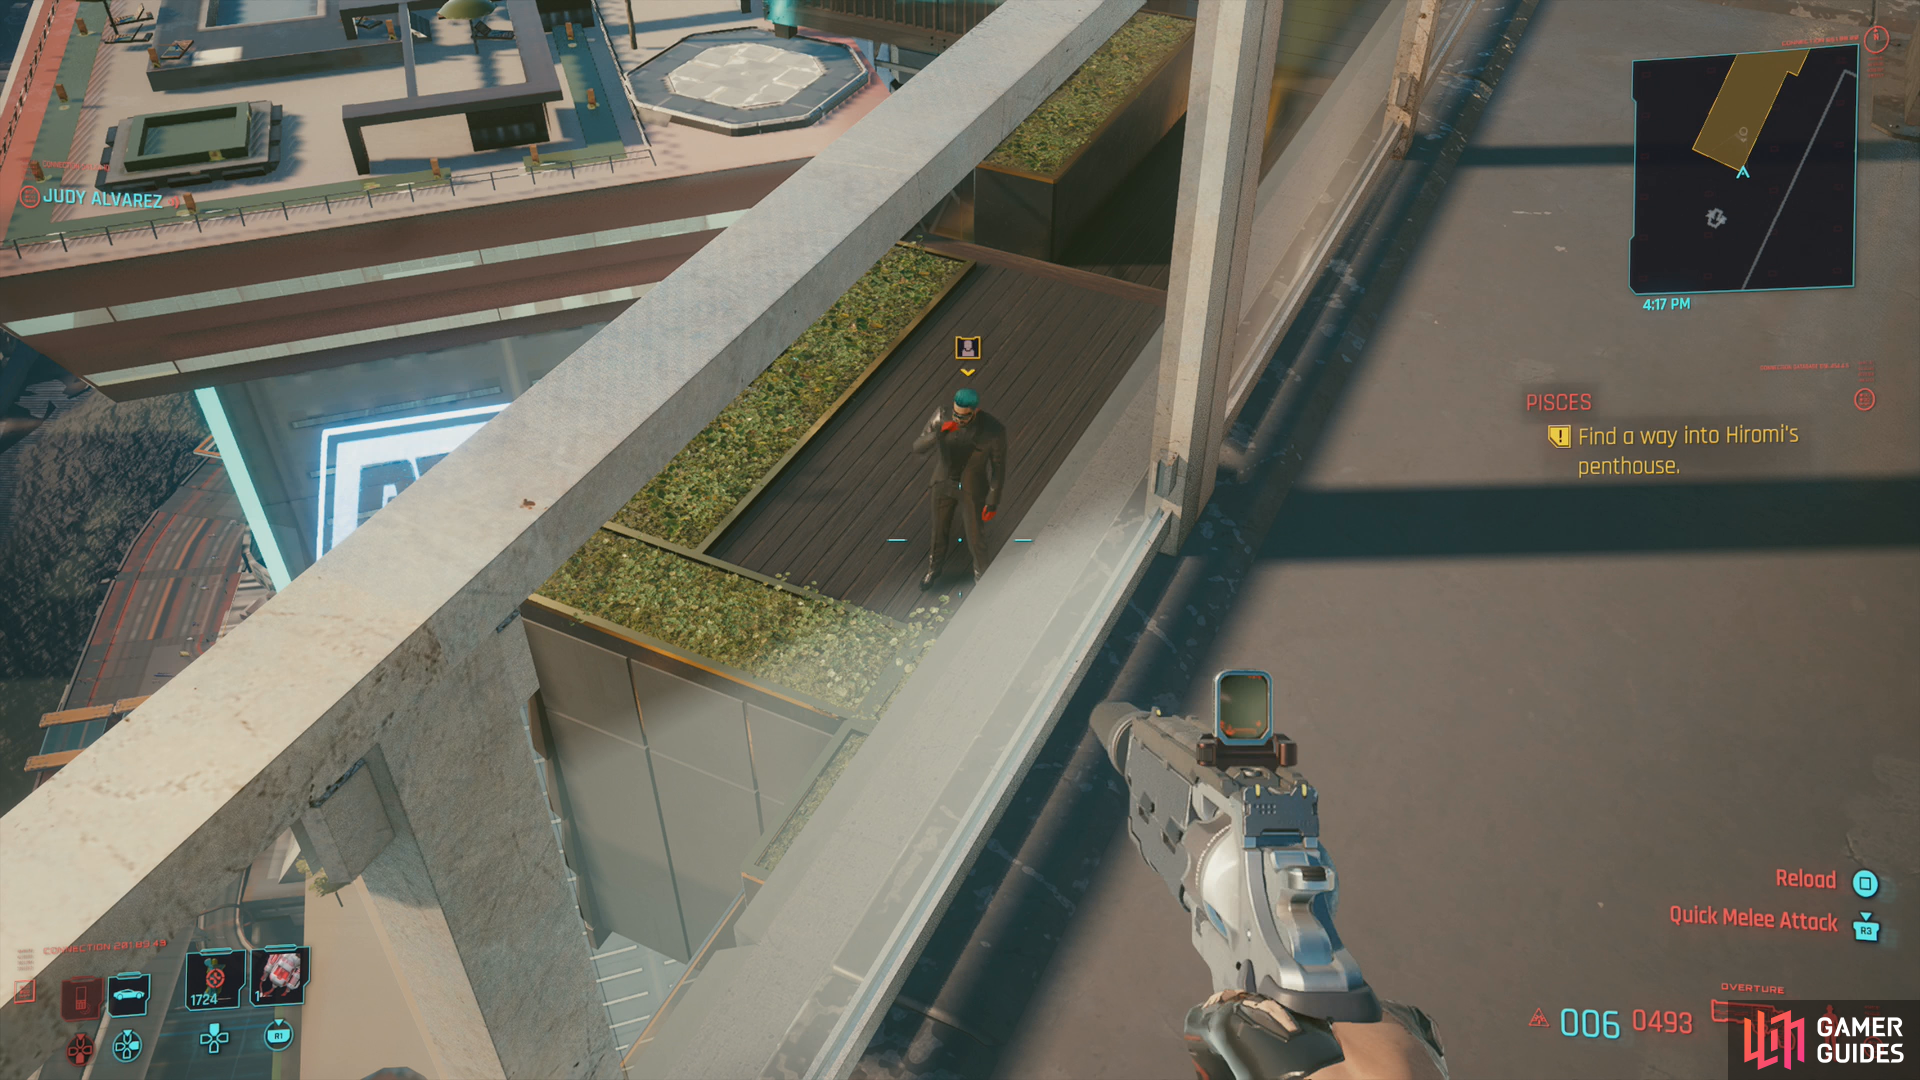 You can drop down directly onto the balcony outside of Hiromi's penthouse, but be wary of patrolling guards.